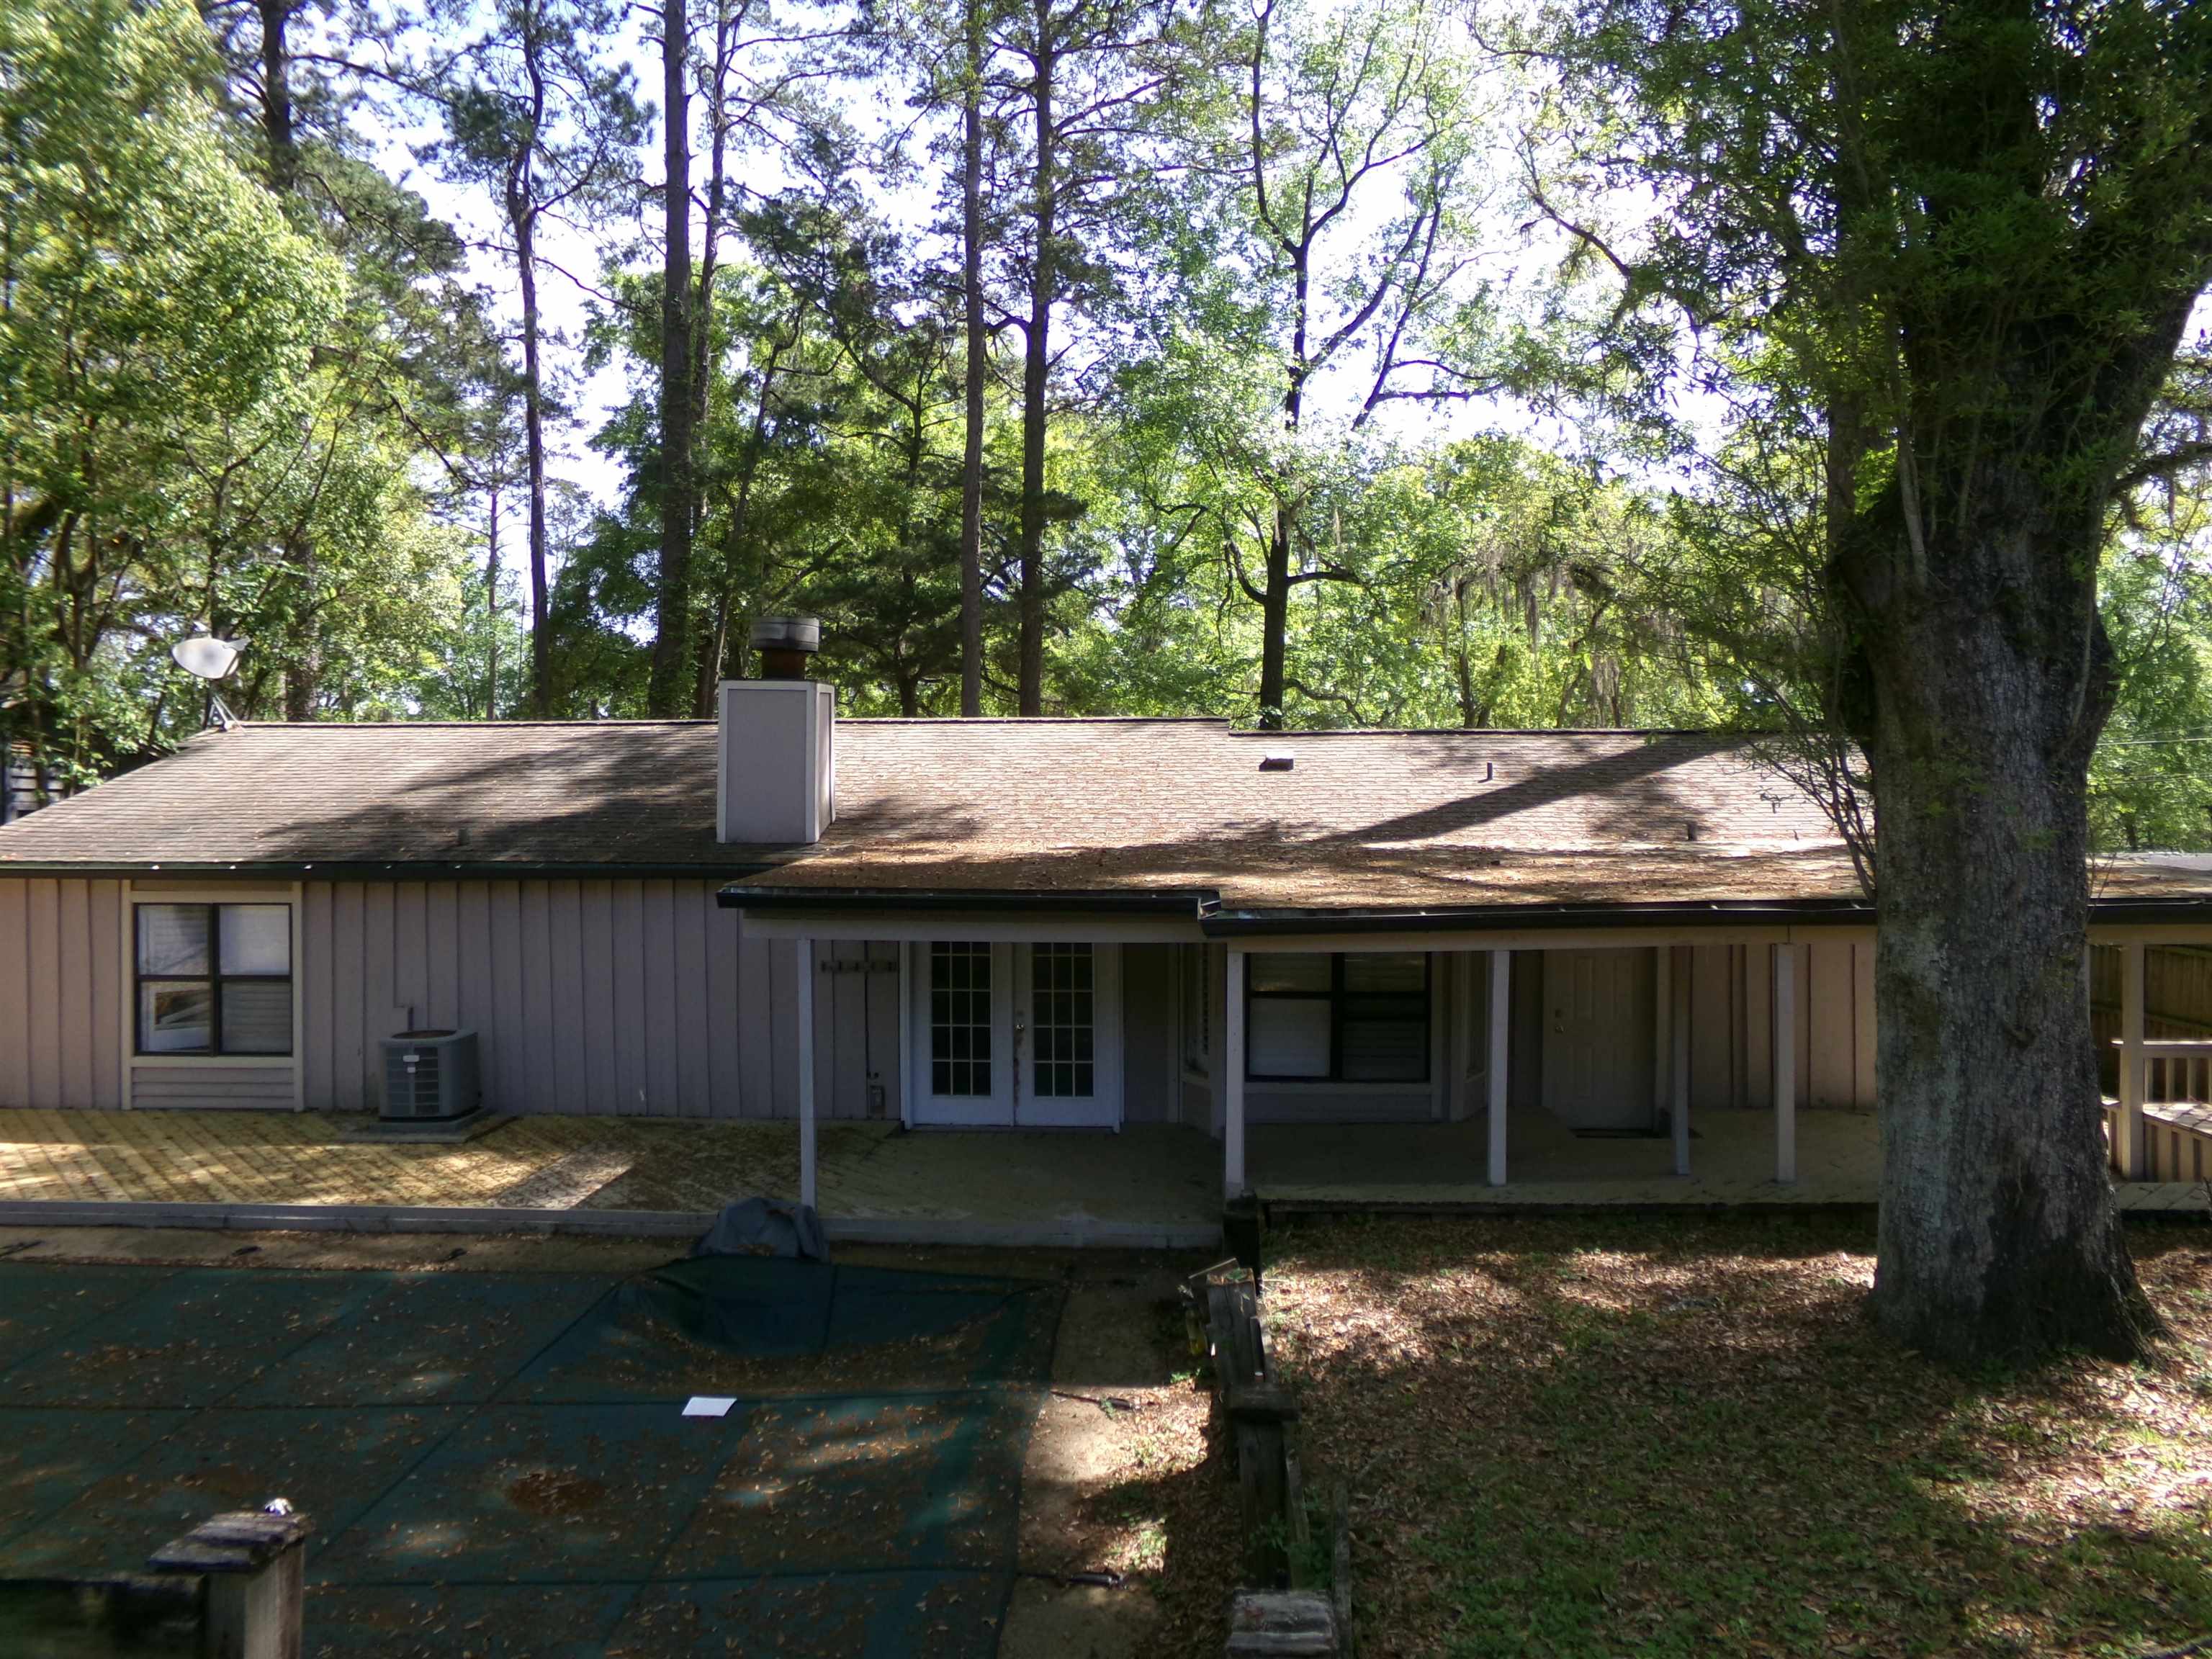 2416 Lanrell Drive,TALLAHASSEE,Florida 32303,4 Bedrooms Bedrooms,2 BathroomsBathrooms,Detached single family,2416 Lanrell Drive,370217